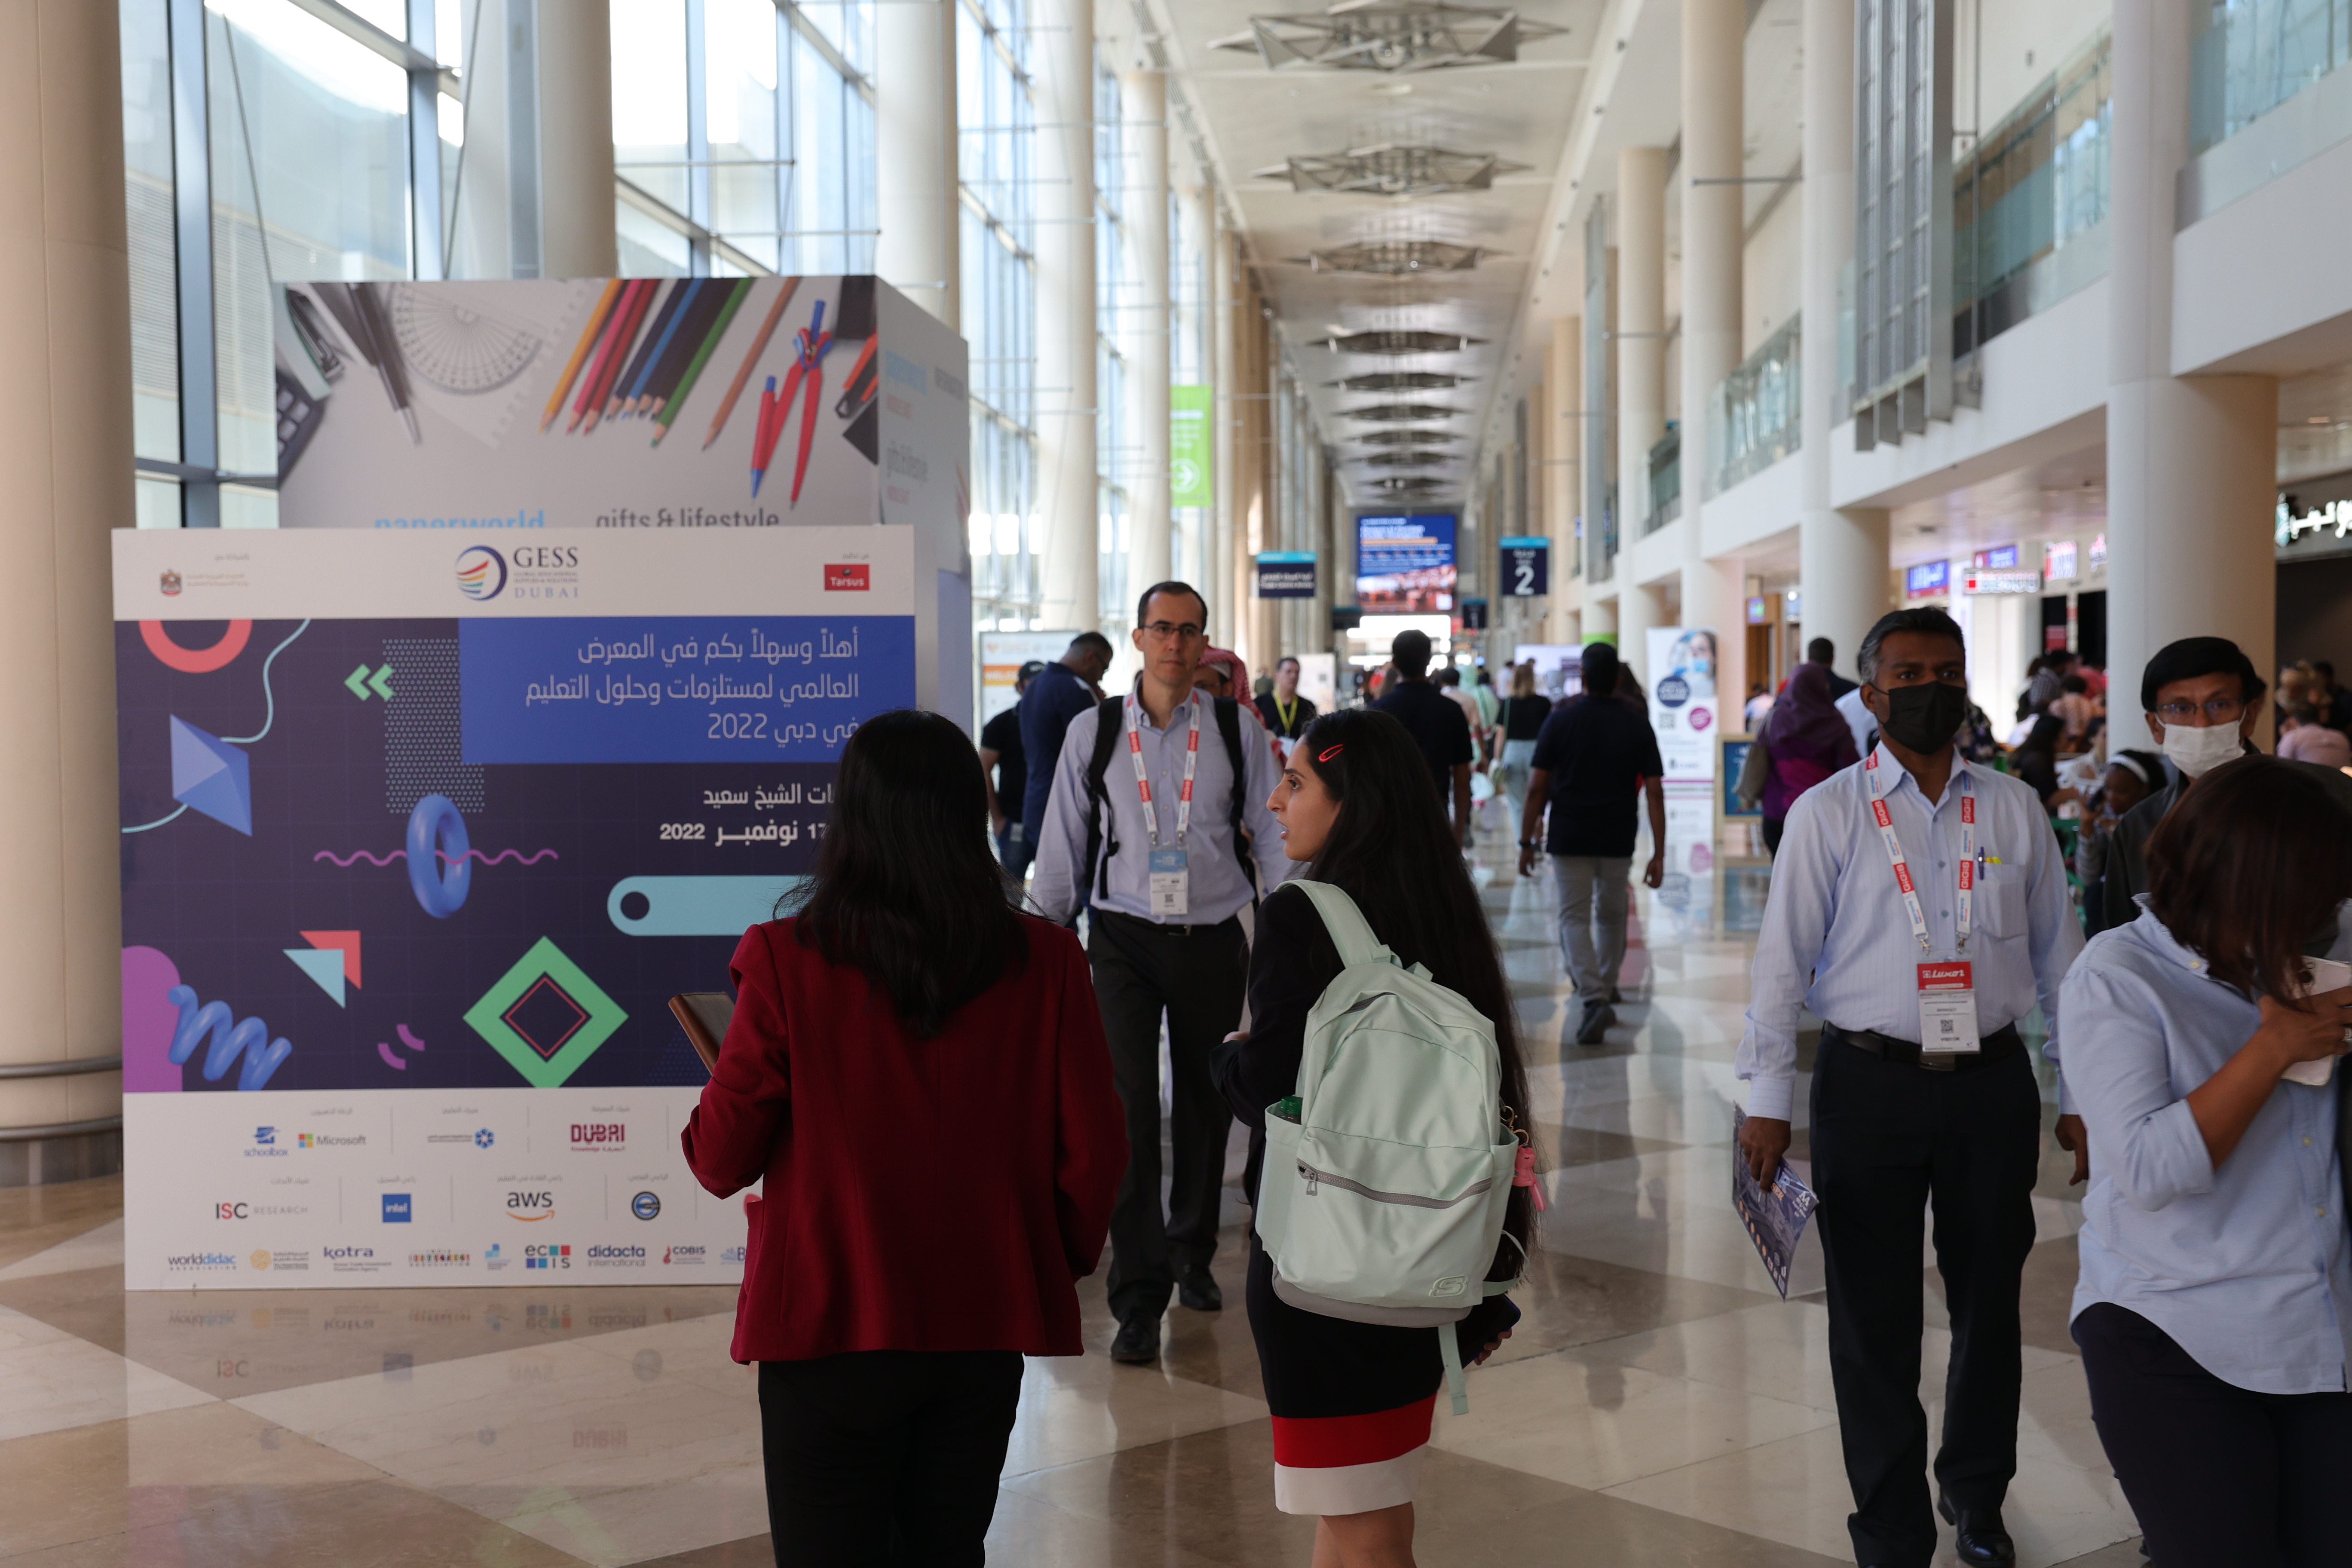 Visitors arriving at GESS Dubai conference and exhibition